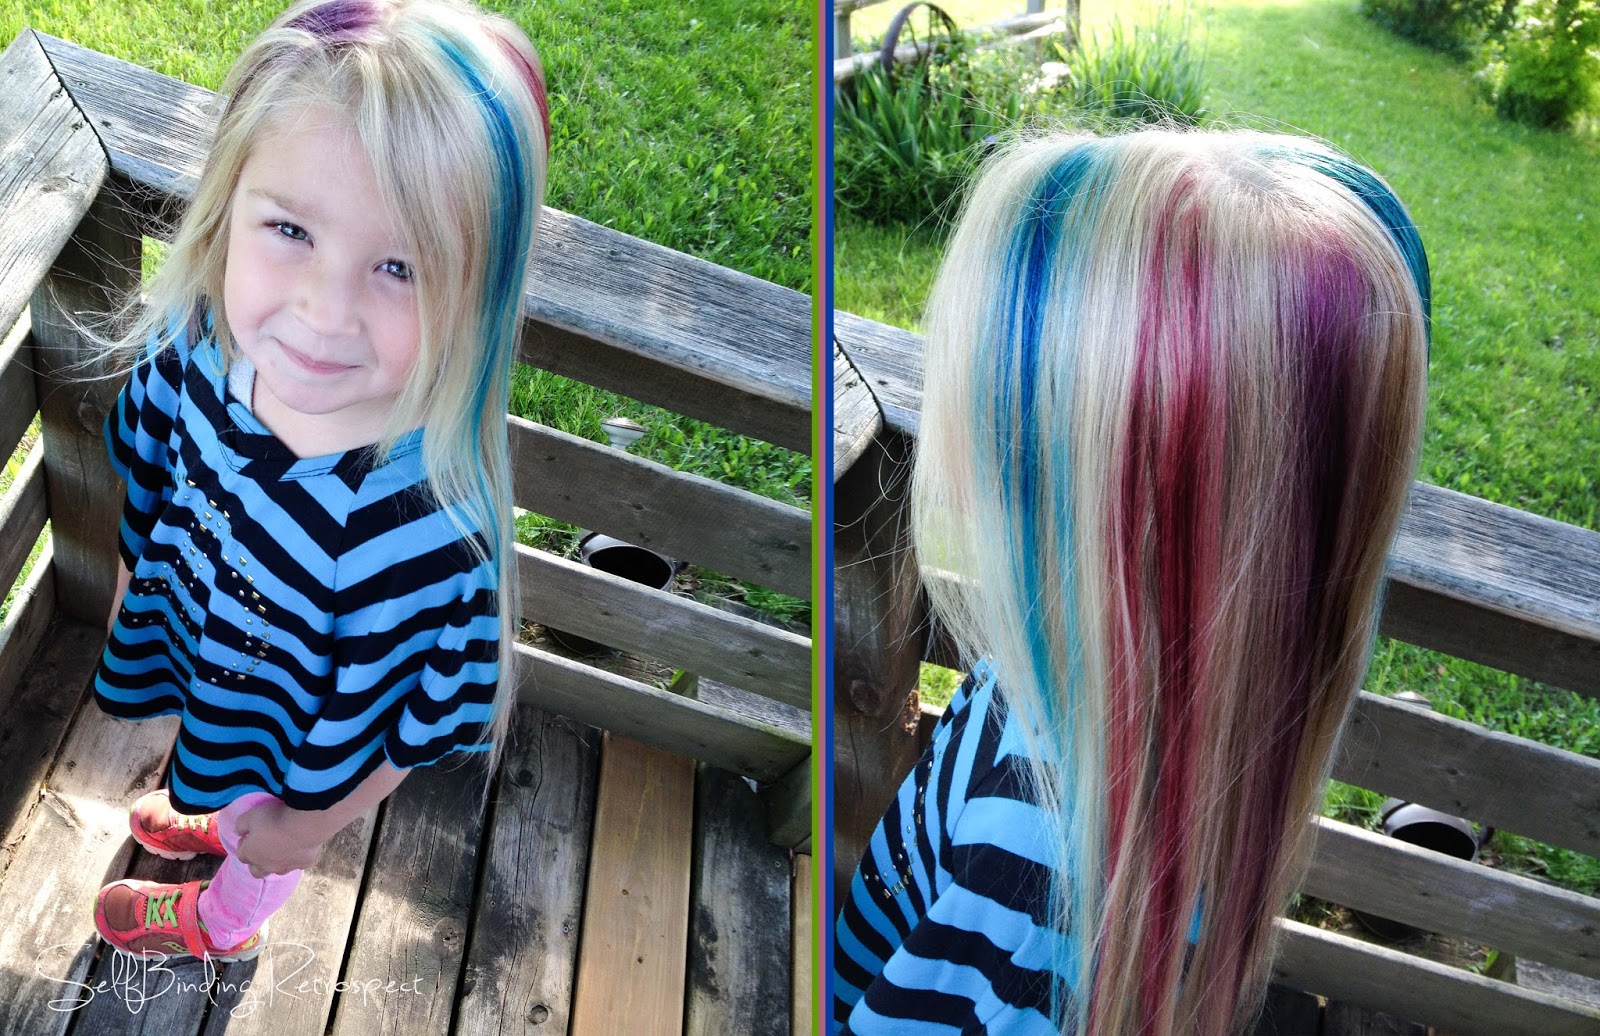 How To Dye Hair With Food Coloring - Watch What Happens When You Add